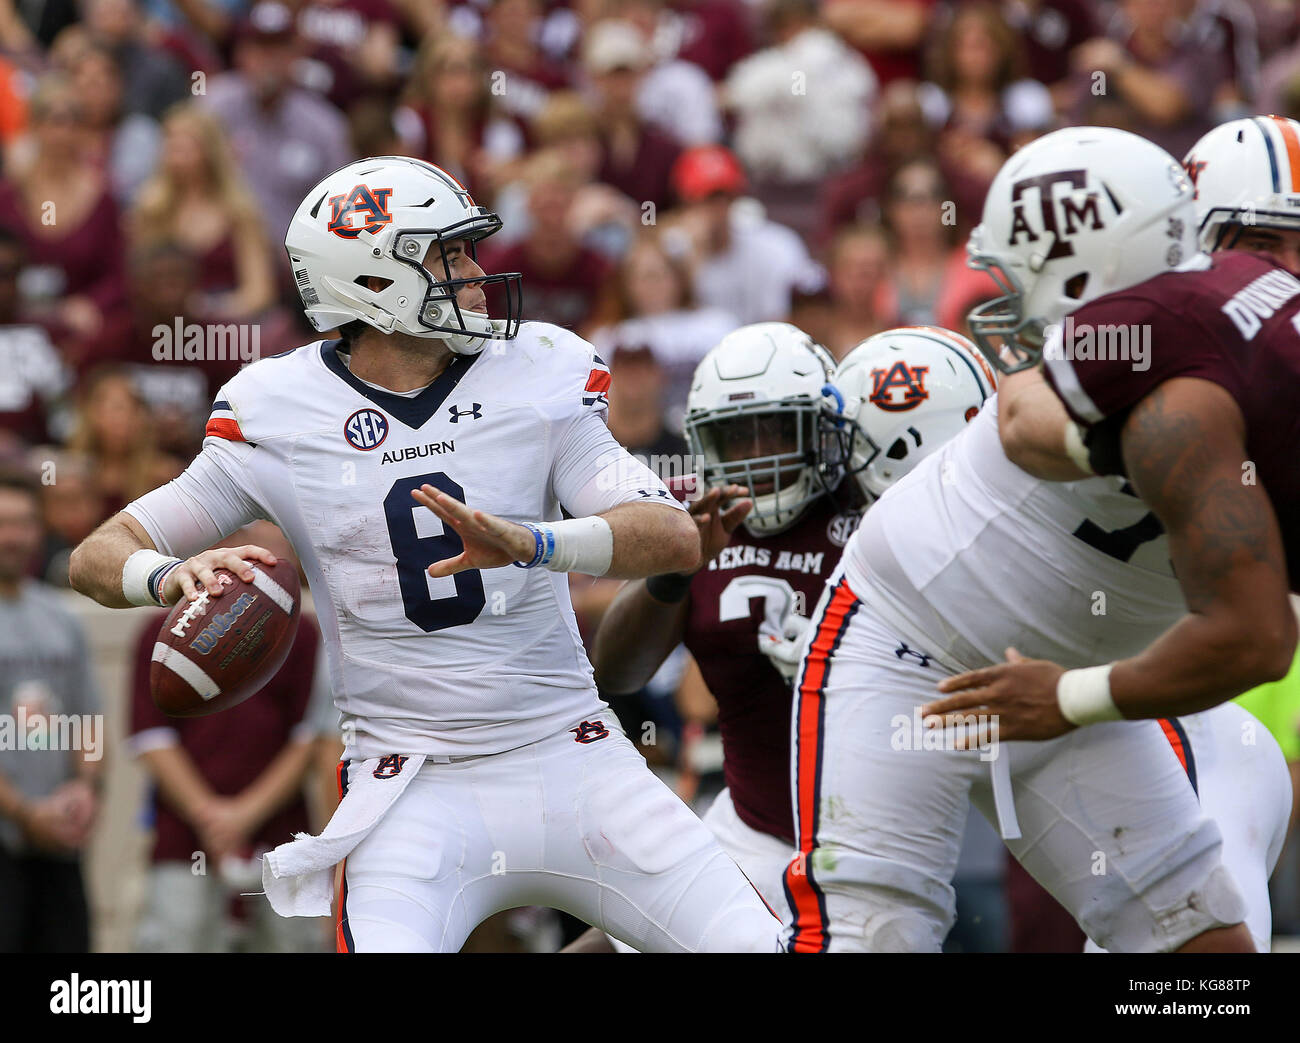 November 4, 2017: Auburn Tigers defensive back Carlton Davis (6) drops back to pass in the second quarter during the NCAA football game between the Auburn Tigers and the Texas A&M Aggies at Kyle Field in College Station, TX; John Glaser/CSM. Stock Photo